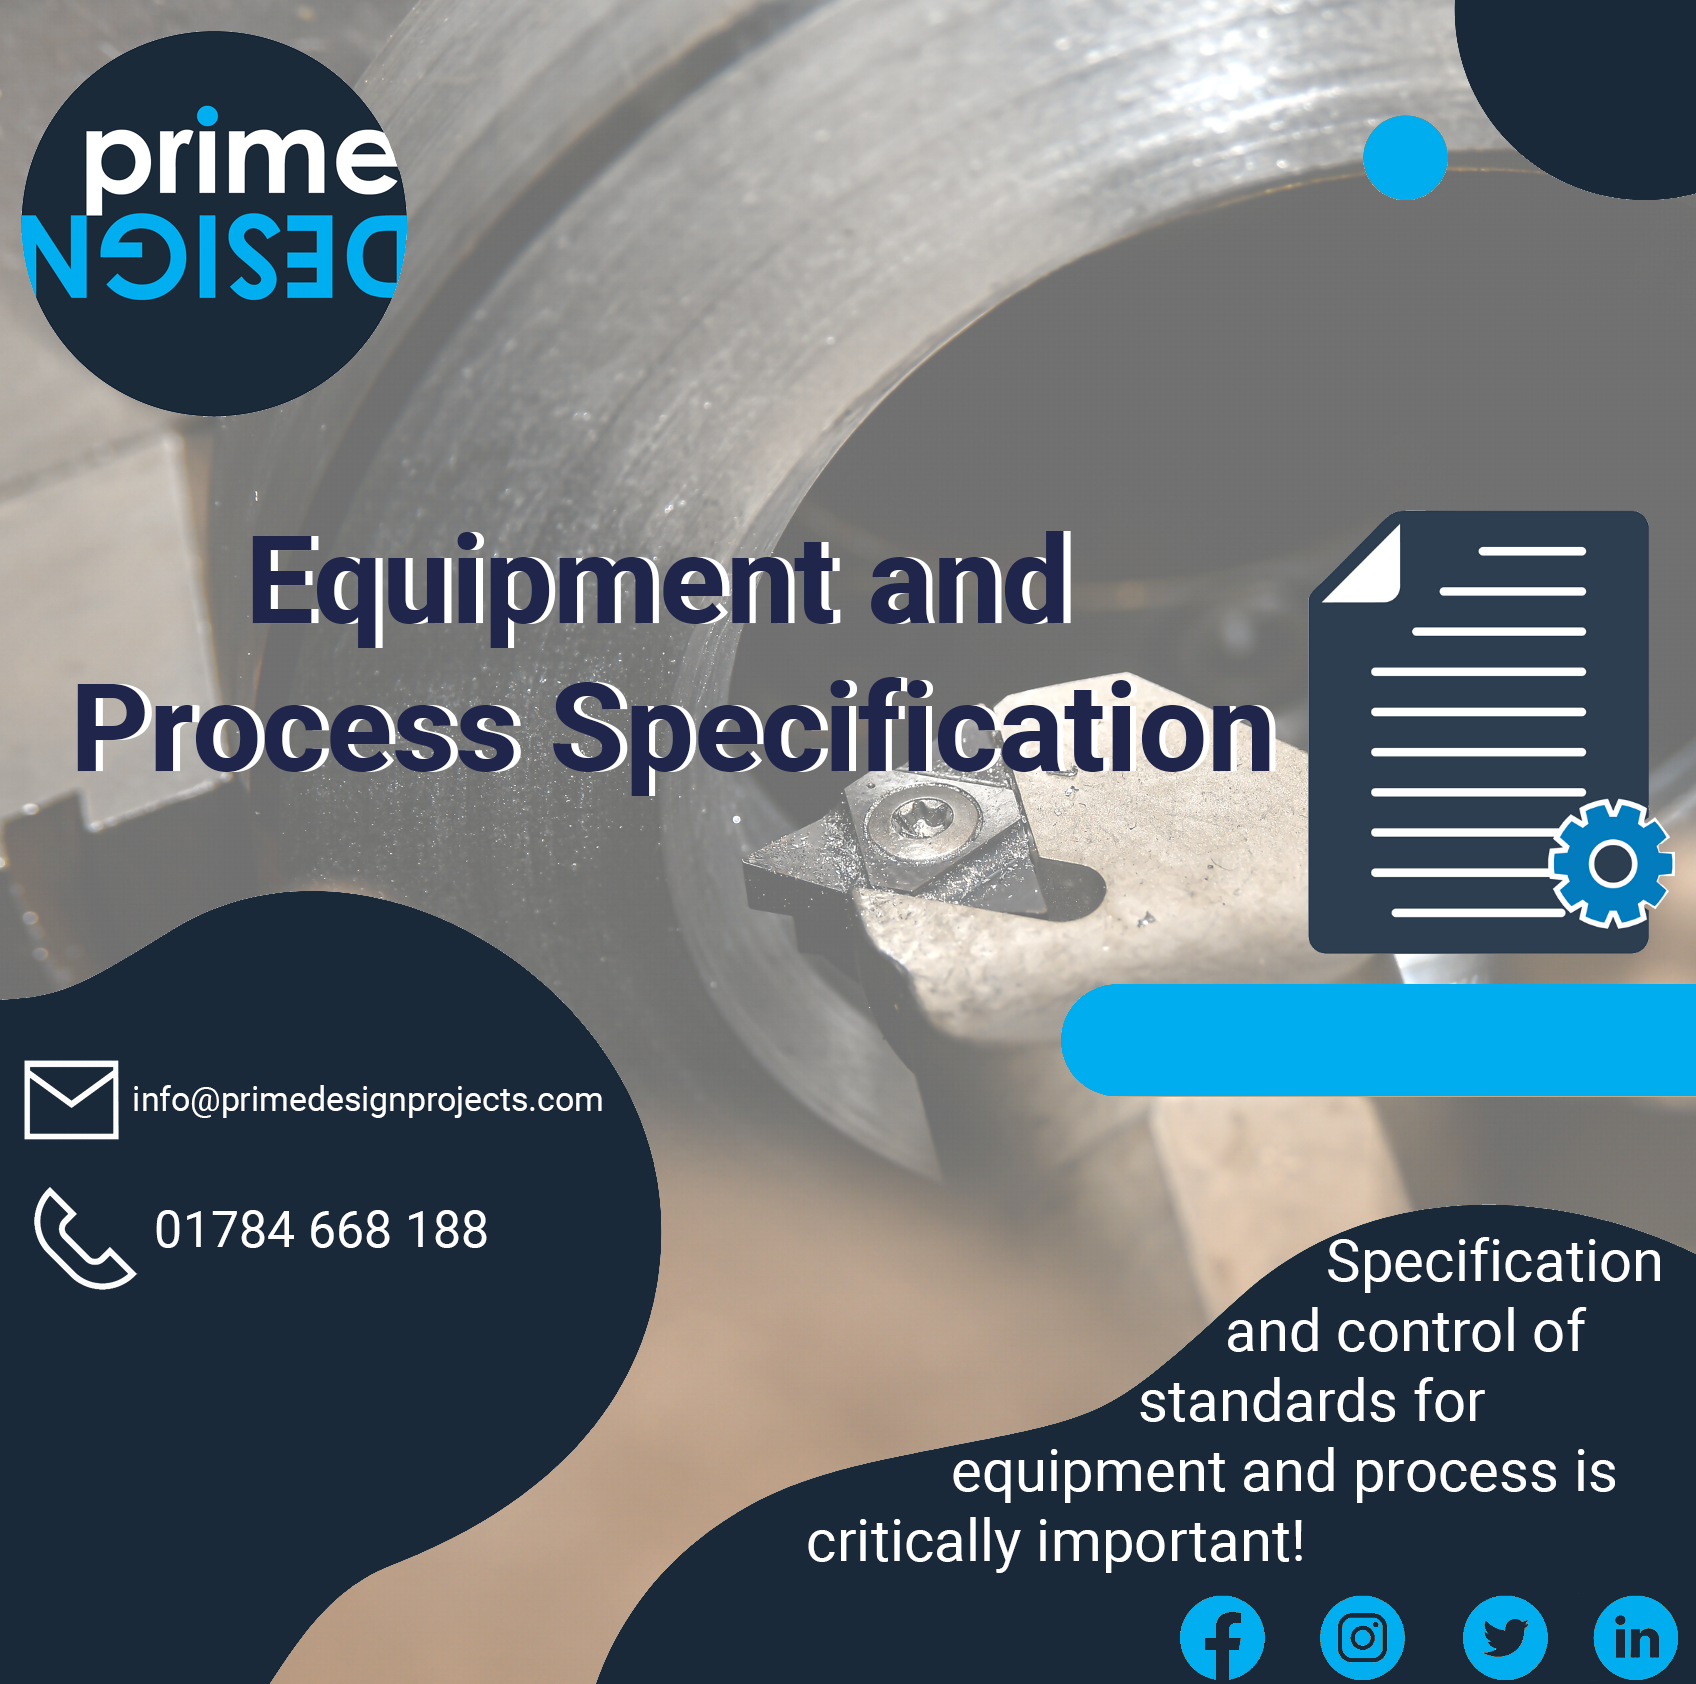 EQUIPMENT AND PROCESS SPECIFICATION